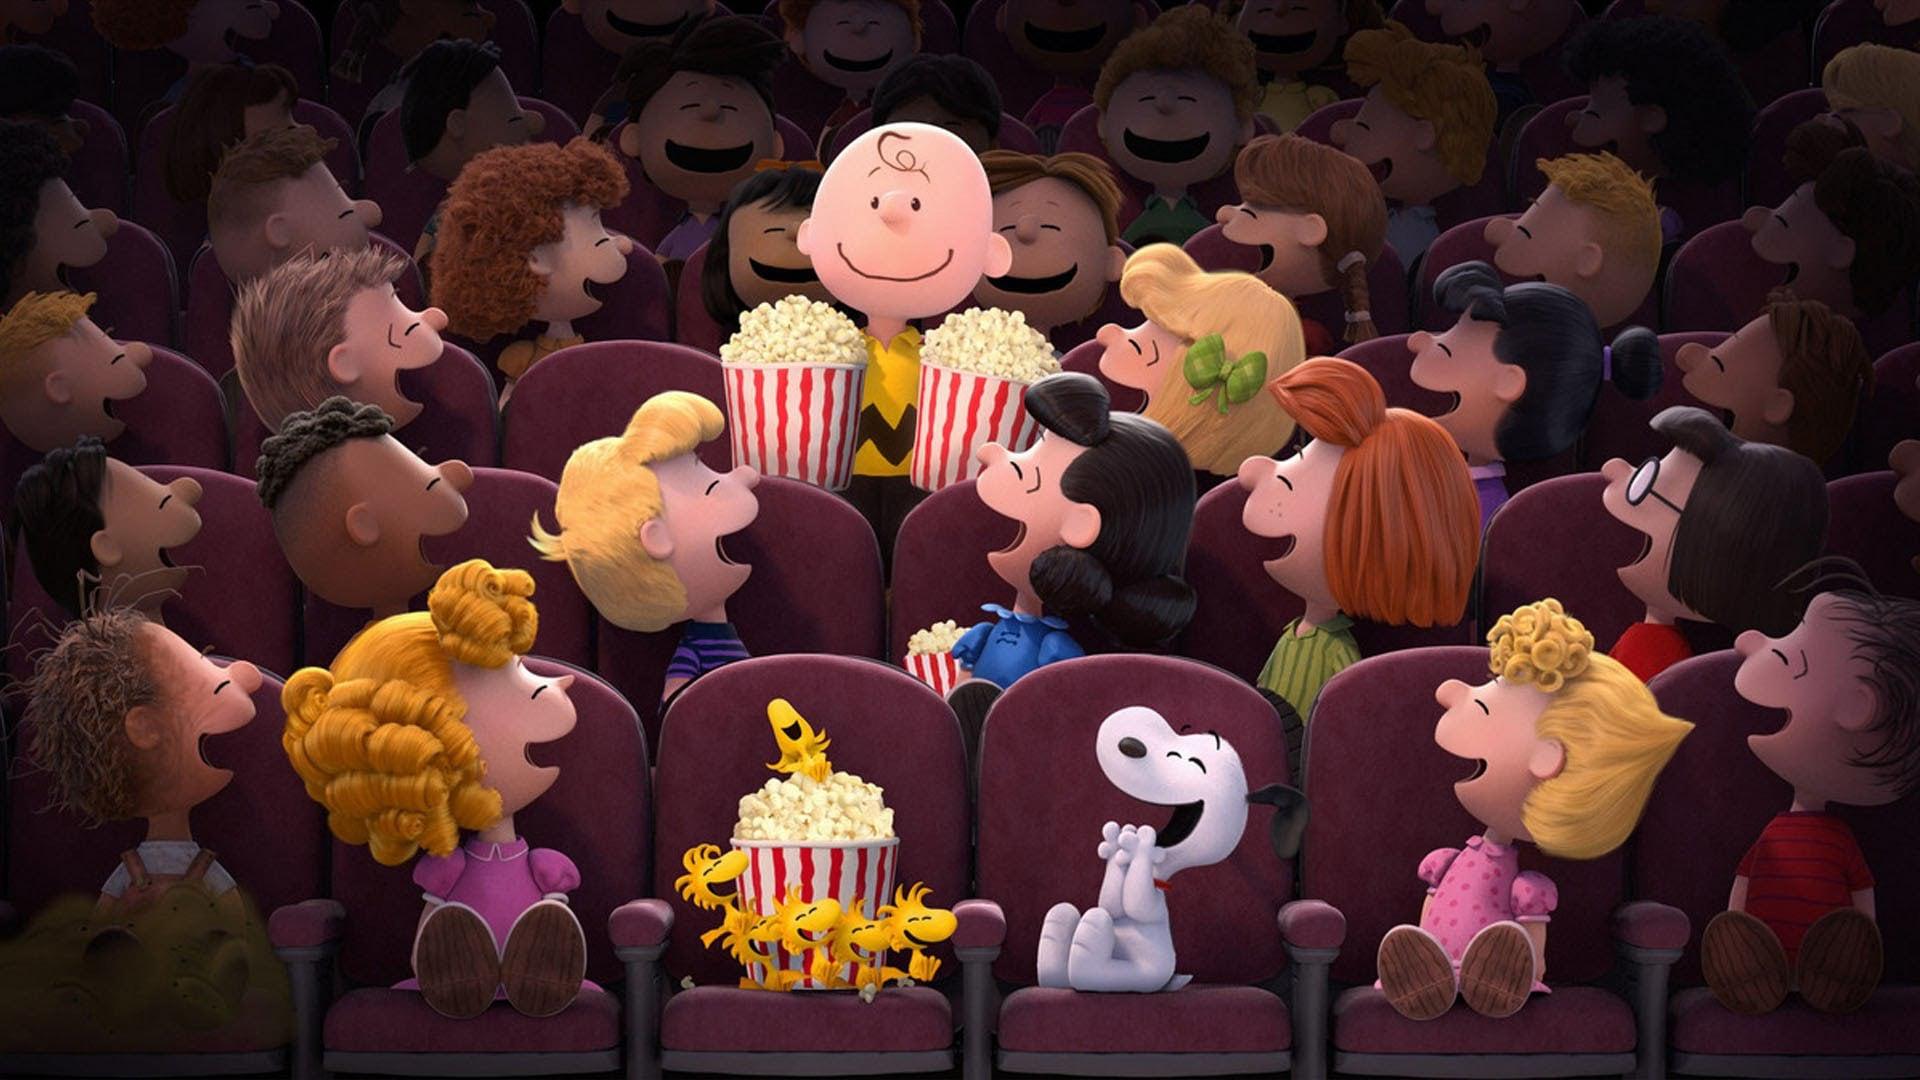 Backdrop Image for The Peanuts Movie